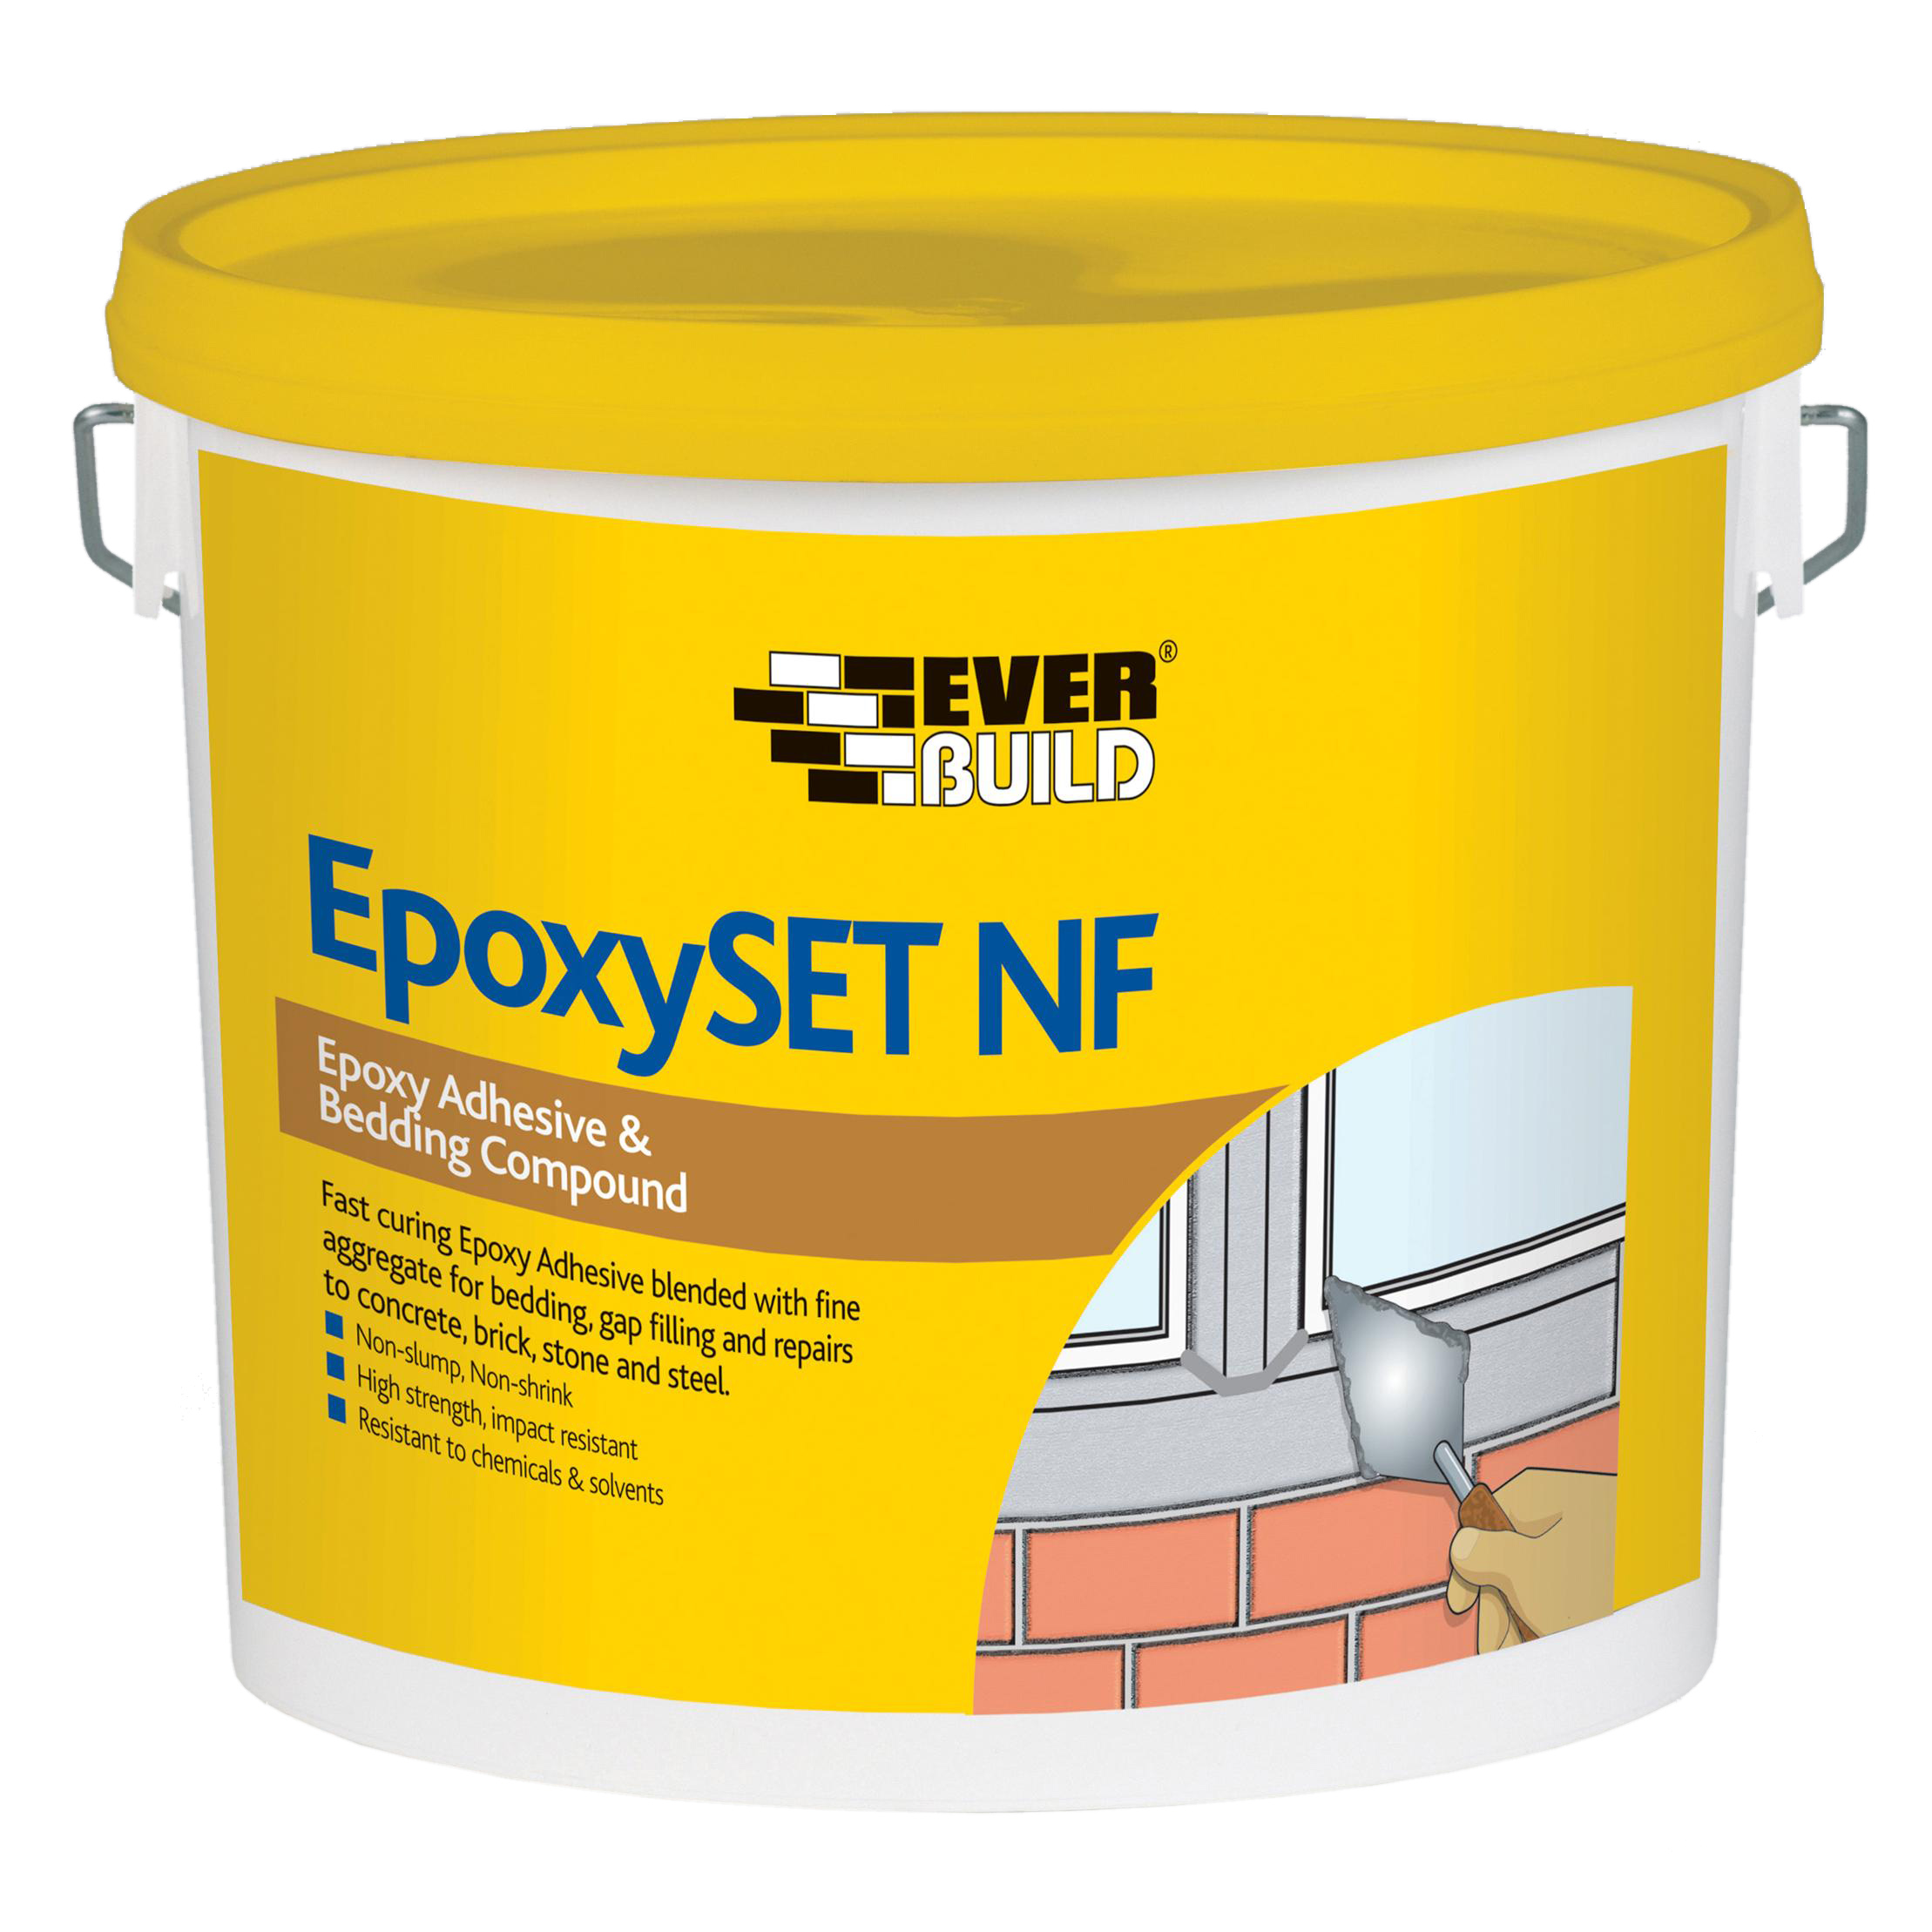 Epoxyset NF Grey 10kg  ( formerly known as Febox NF )